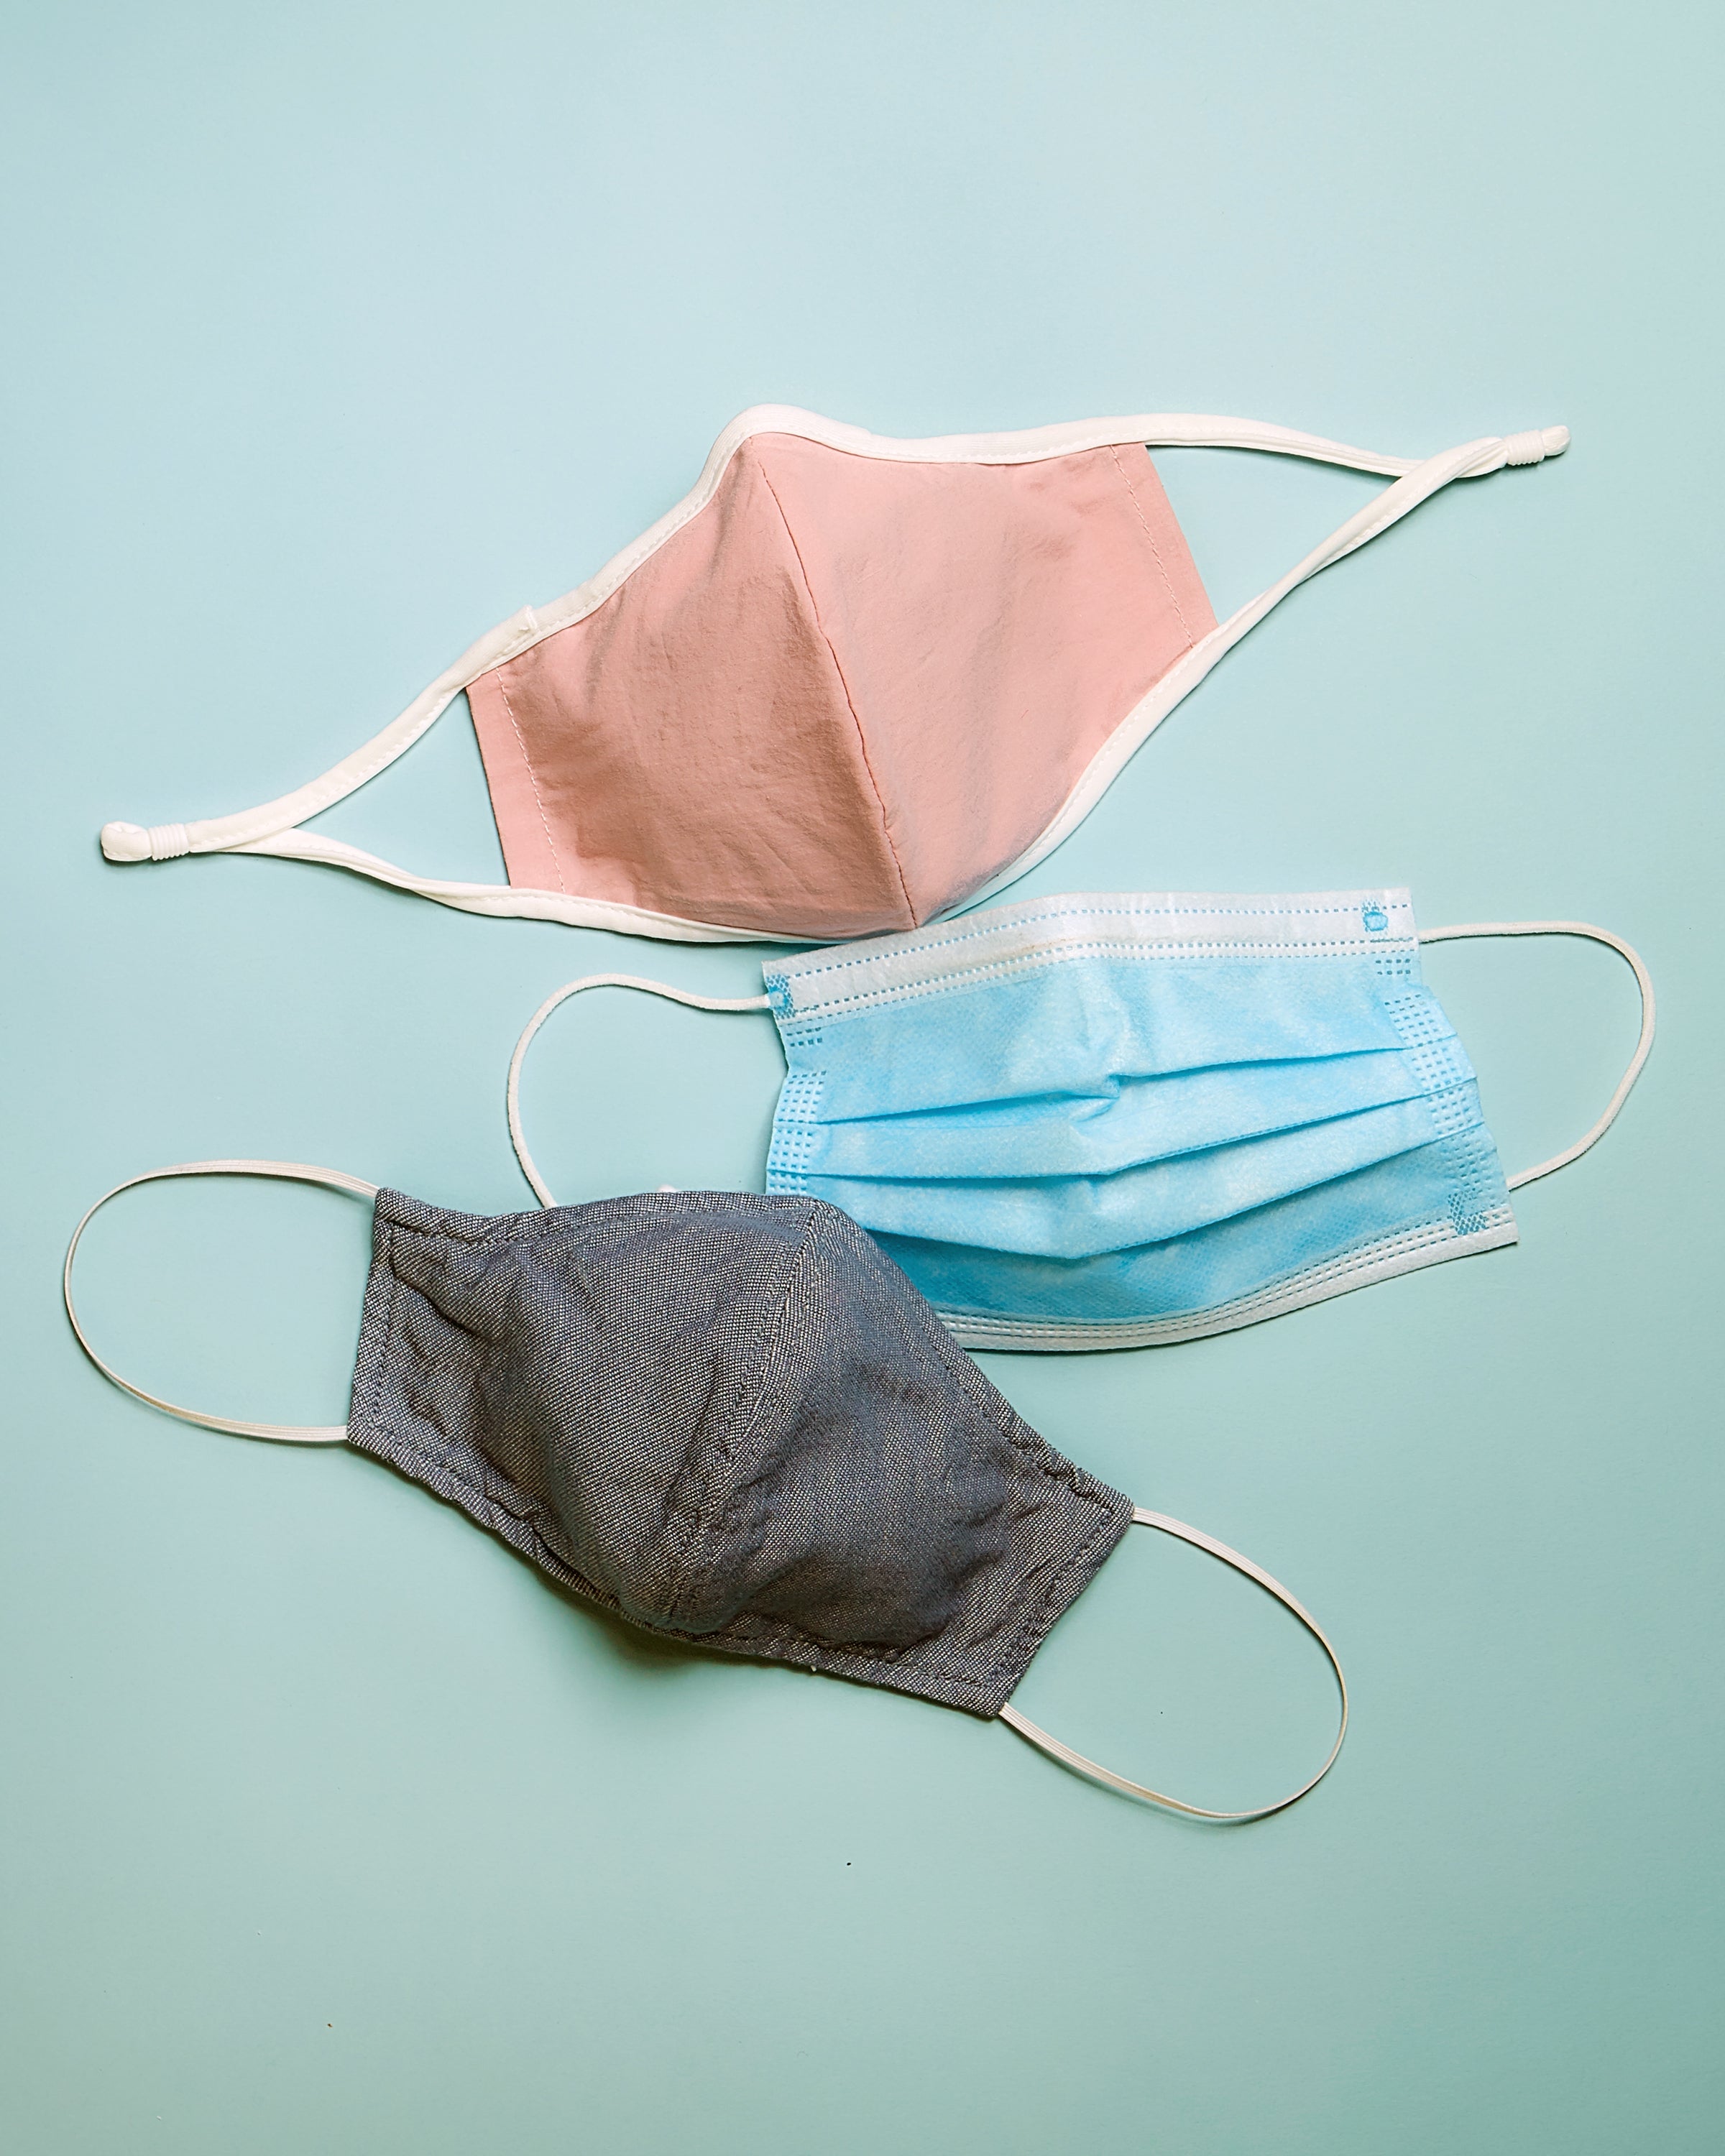 picture of a group of three different masks or face coverings. One is pink, one is a blue disposable mask and one is a denim mask made by Hedley & Bennett.